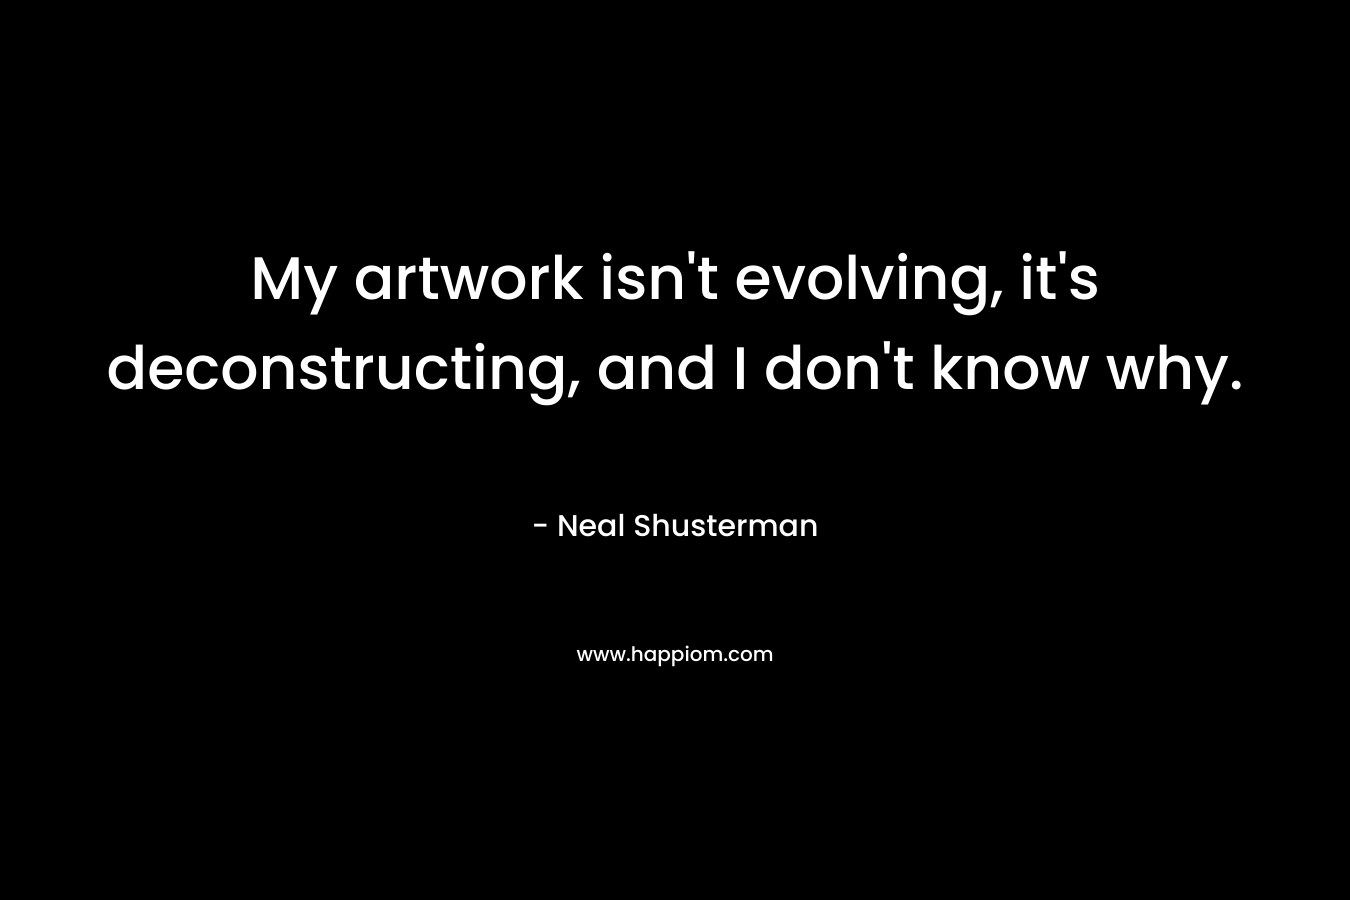 My artwork isn’t evolving, it’s deconstructing, and I don’t know why. – Neal Shusterman